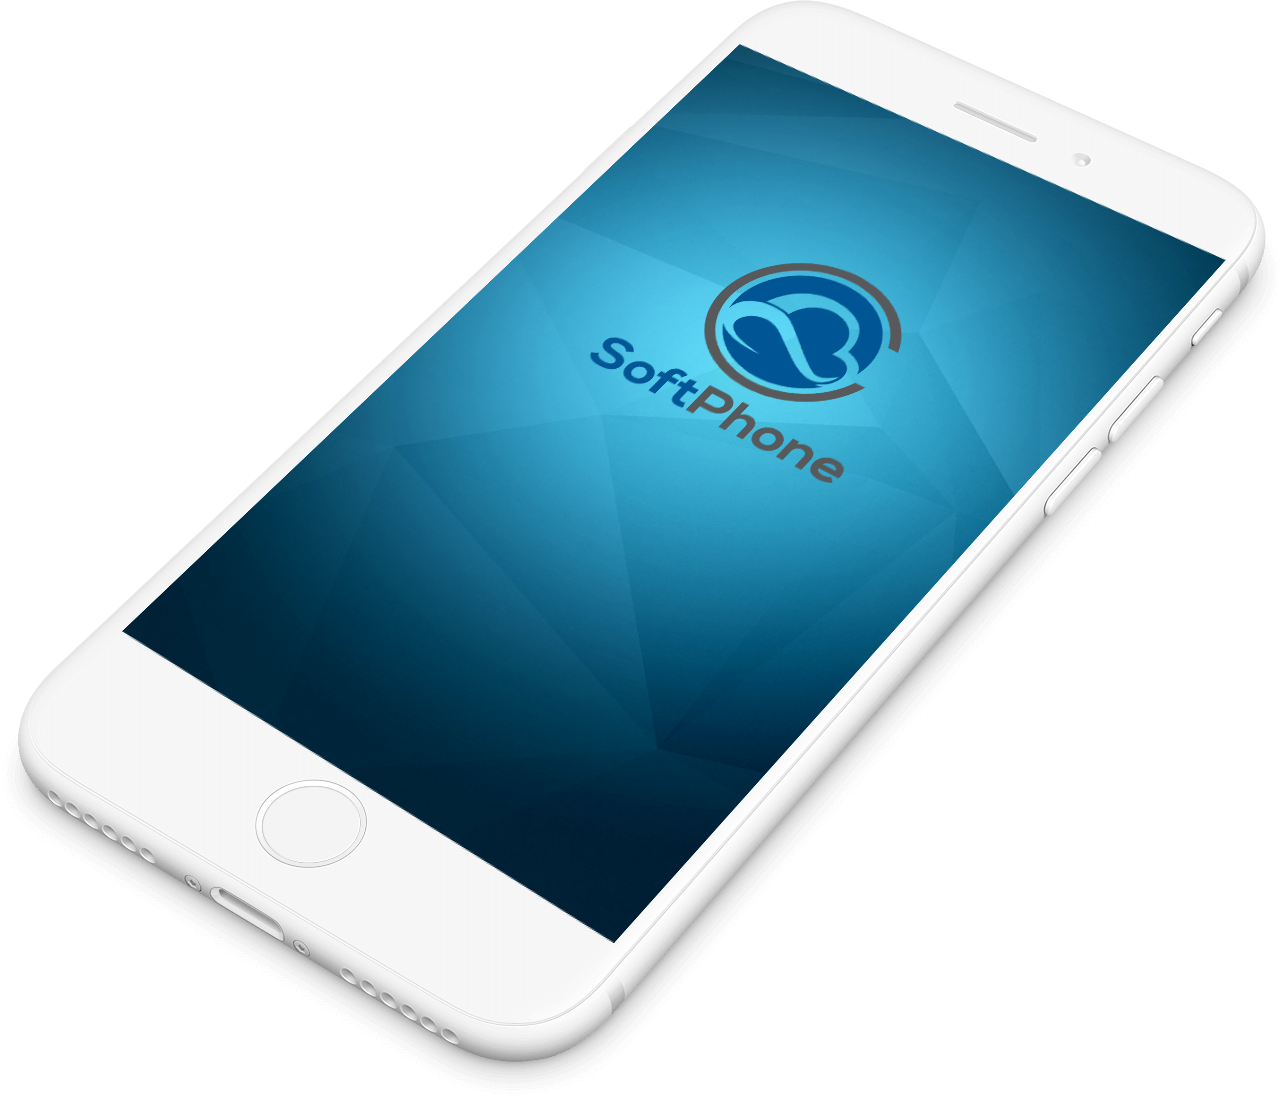 SoftPhone - Android Features